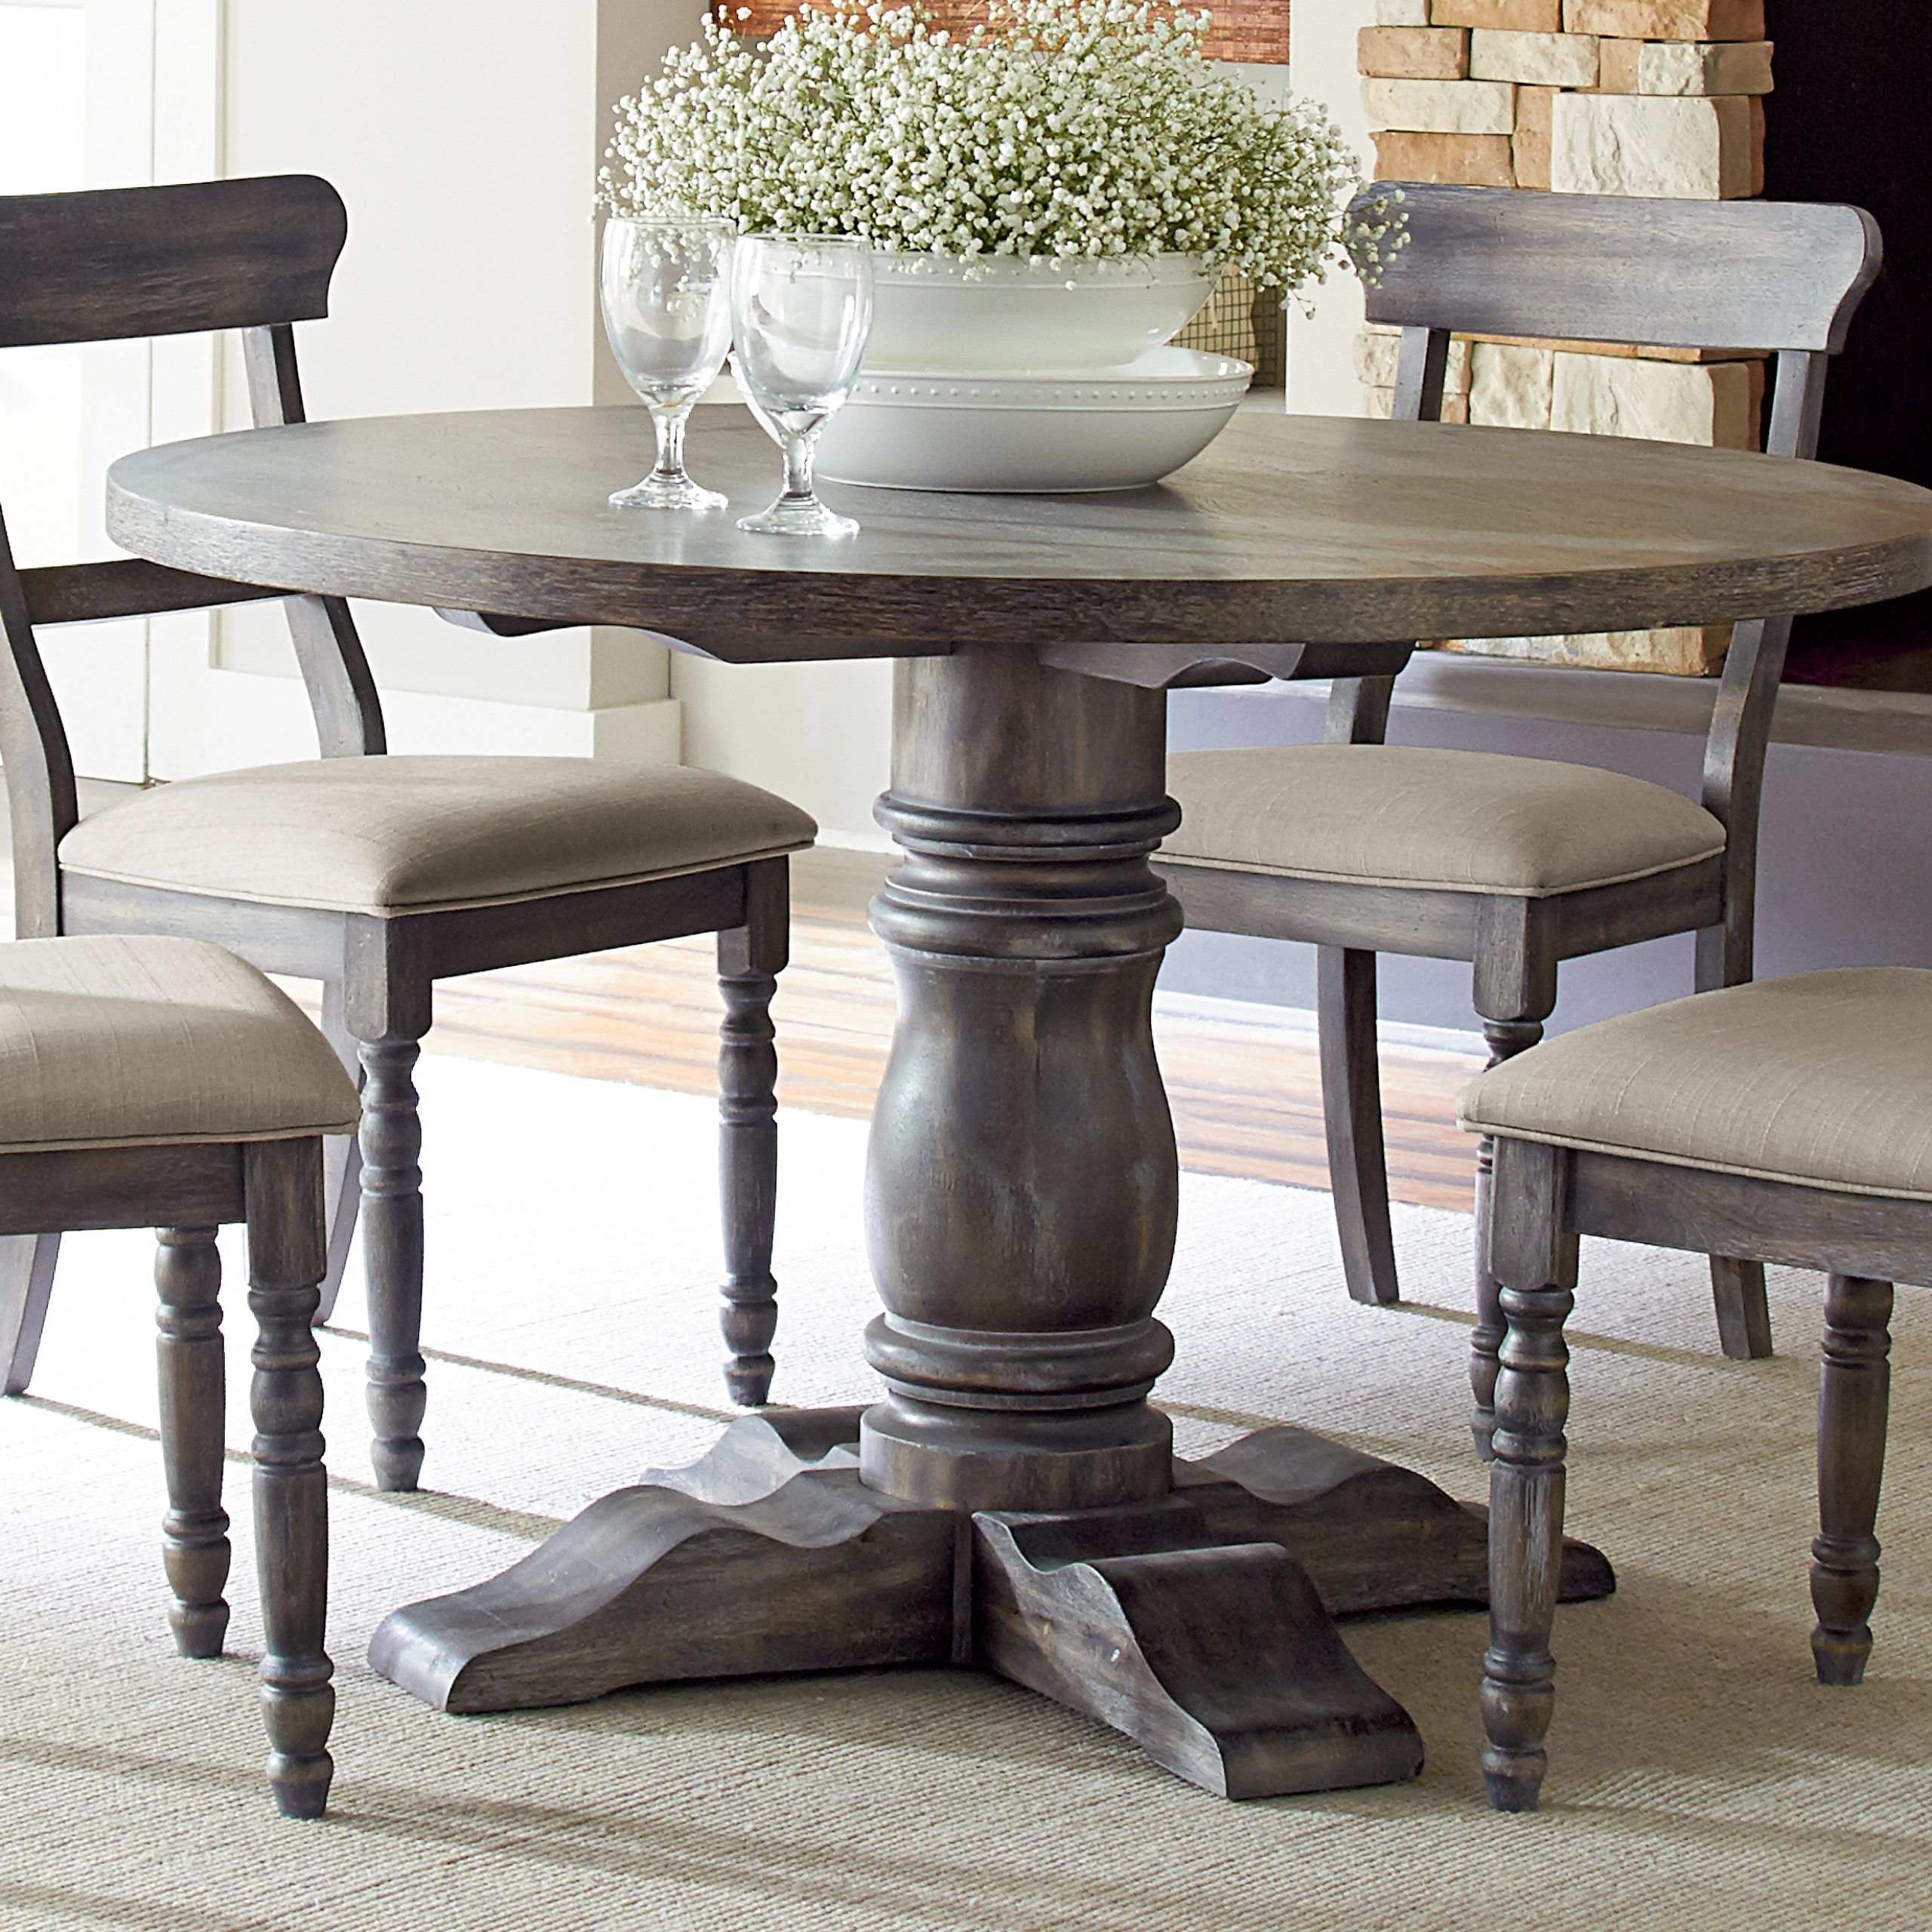 Transitional 6 Seating Casual Dining Tables Intended For Preferred Dining Room Furniture (View 28 of 30)